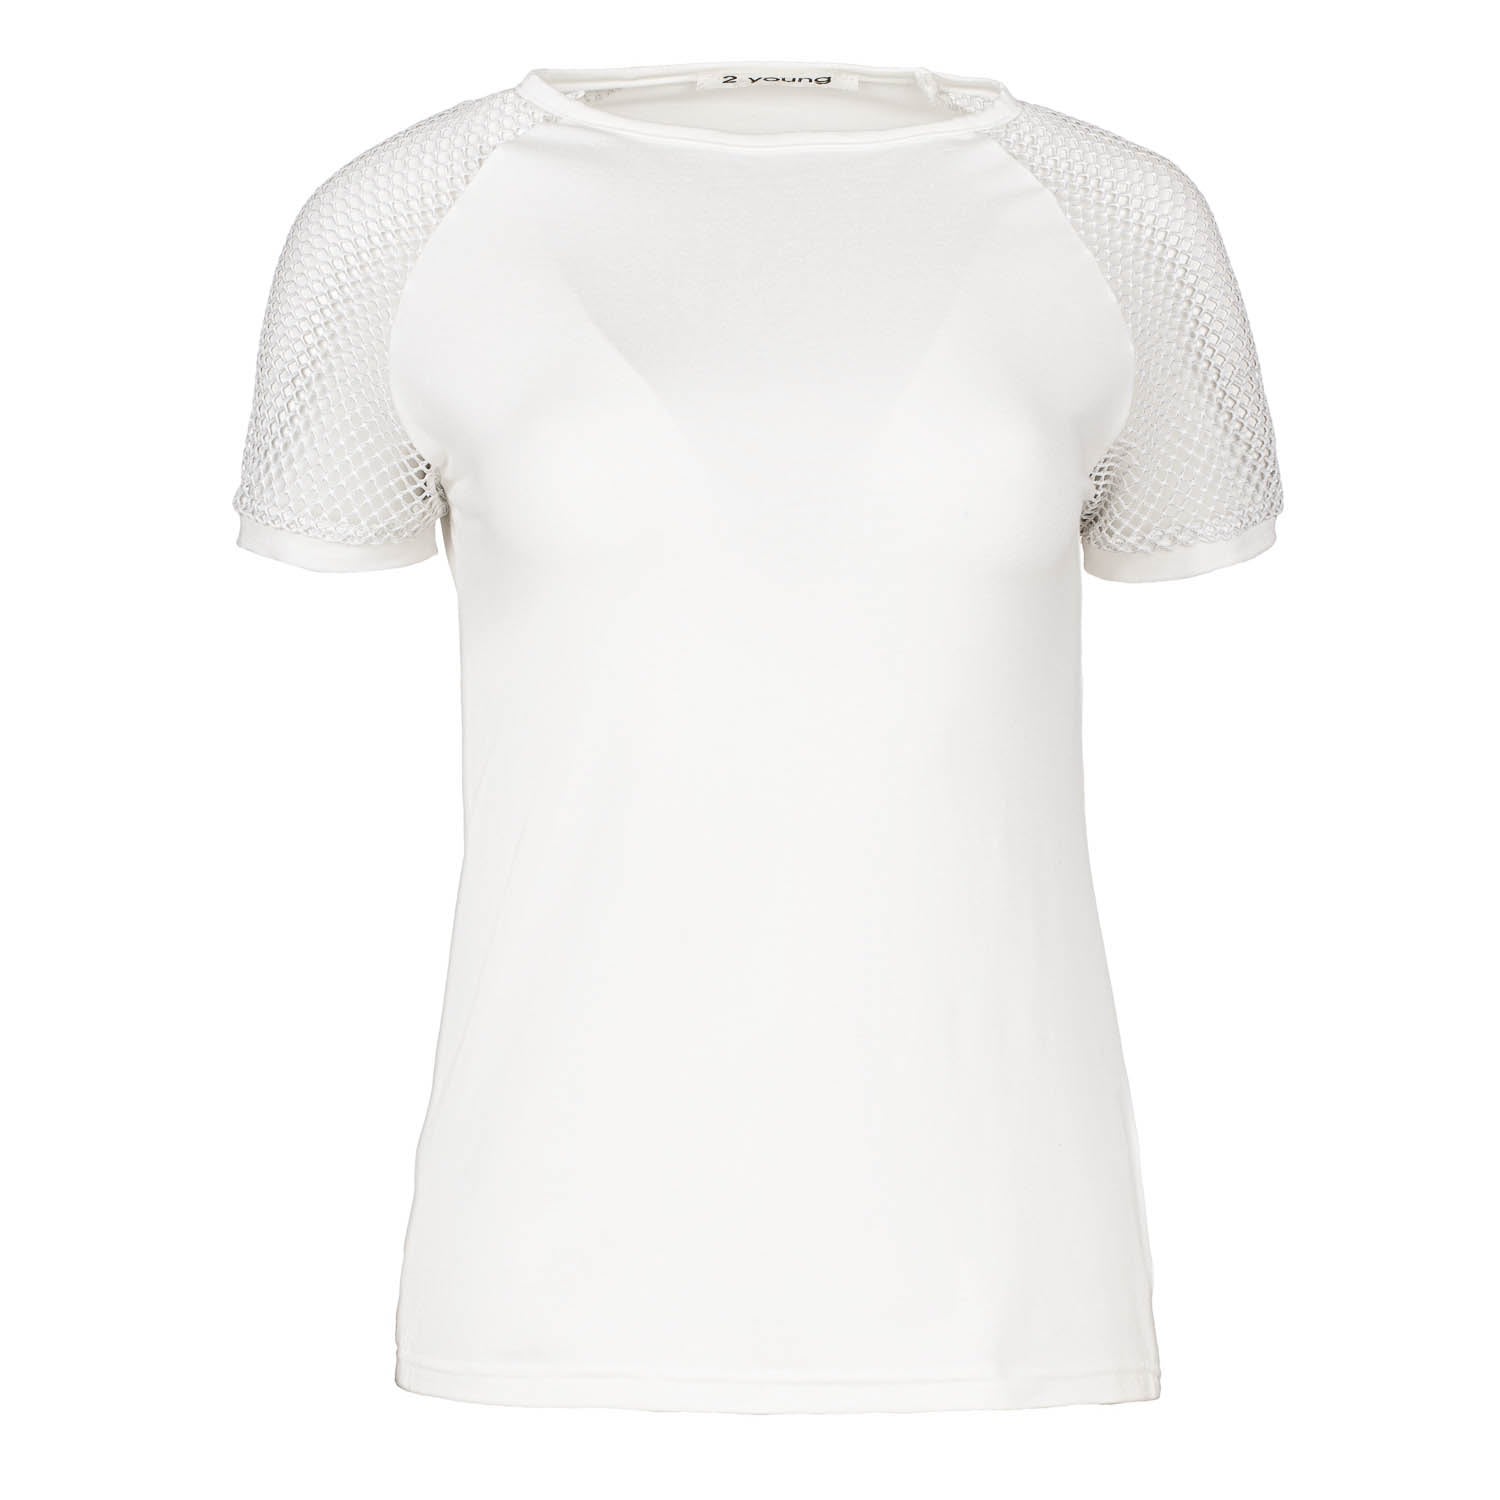 Women's White Ecru Top With Short Net Sleeves Small Conquista